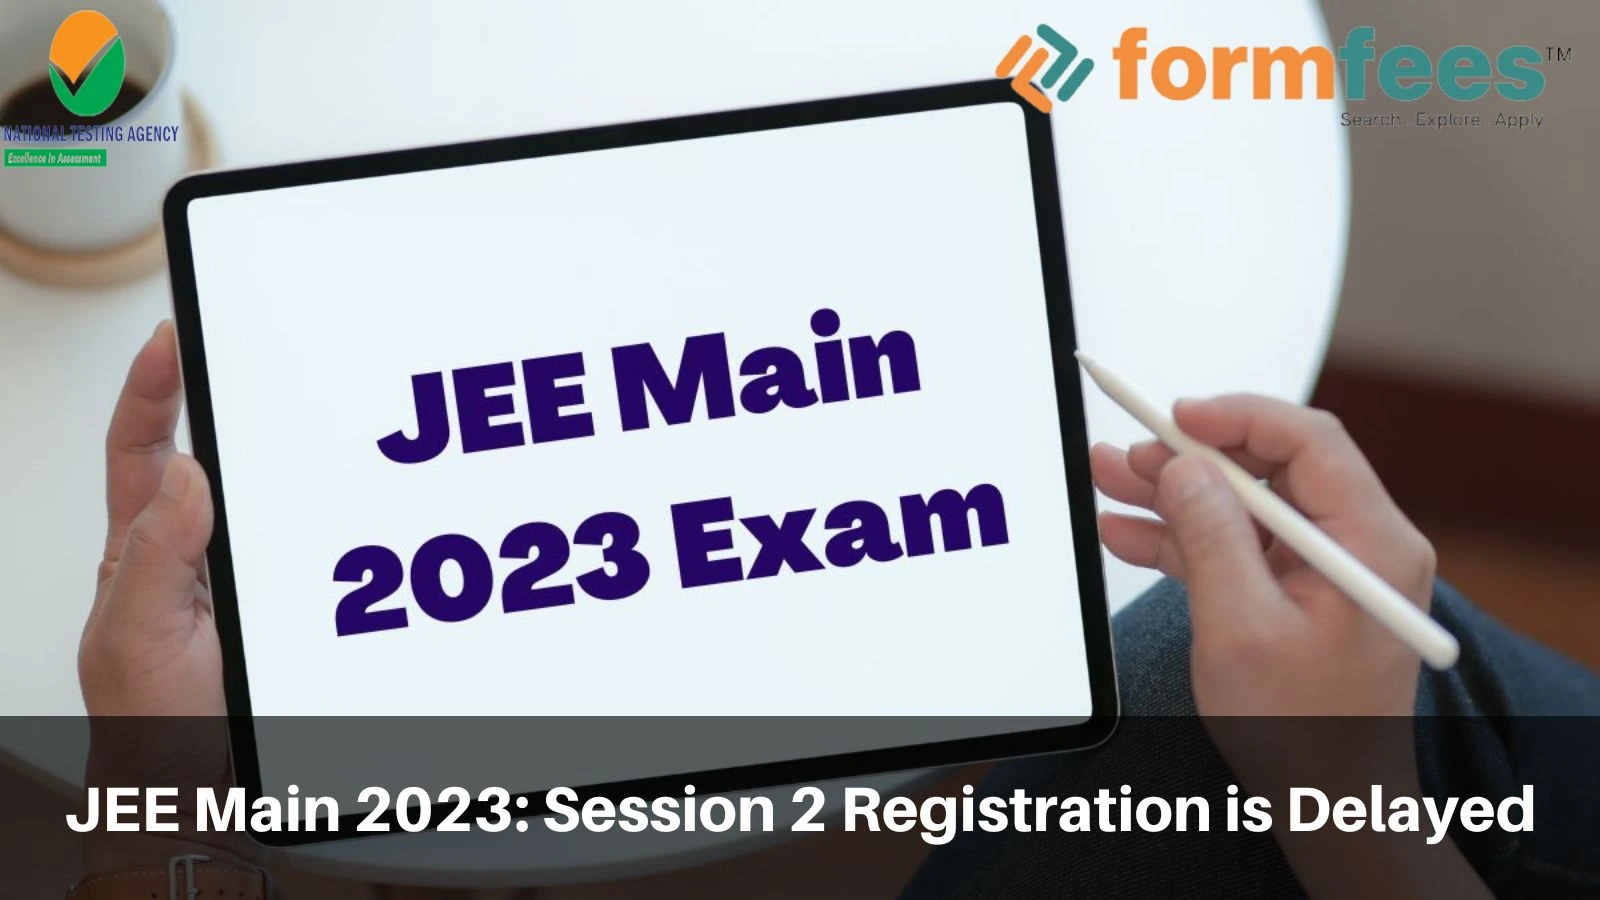 JEE Main 2023: Session 2 Registration is Delayed